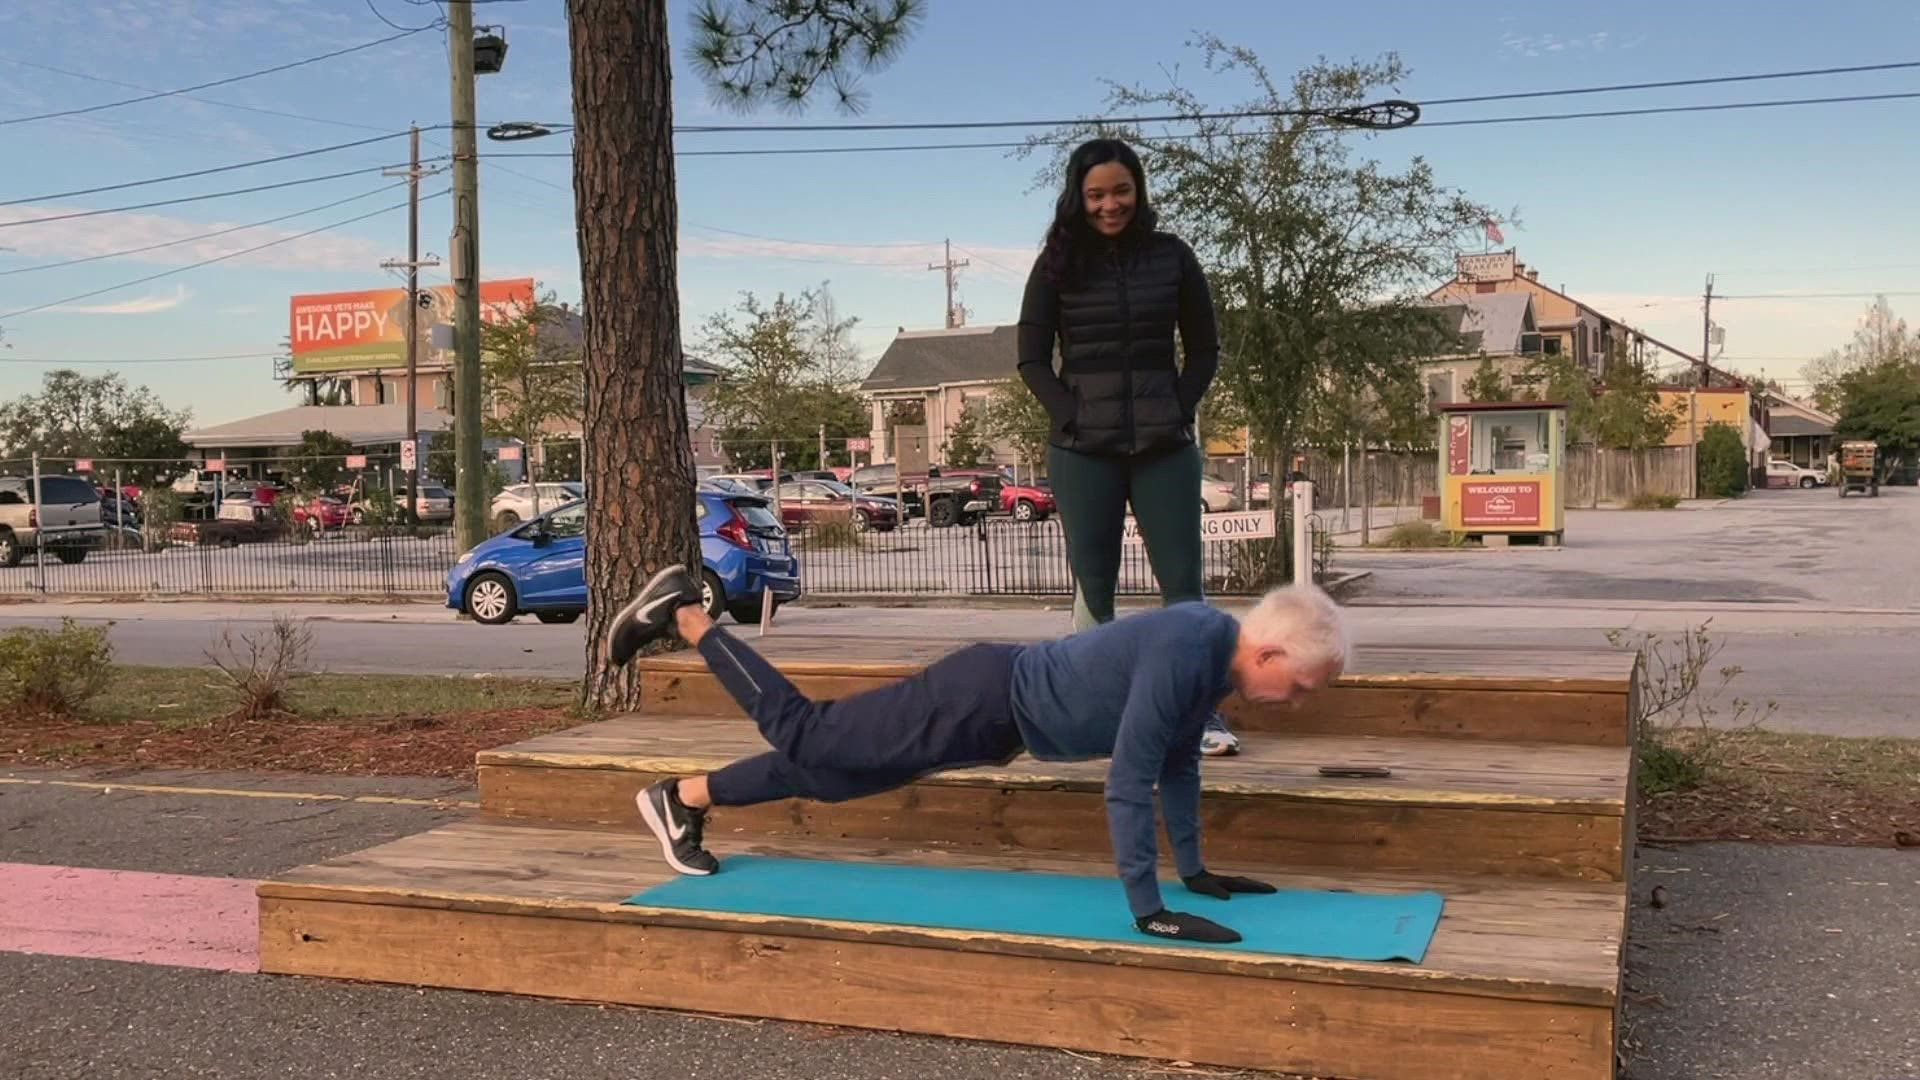 Mackie and April are back with more push-up variations.